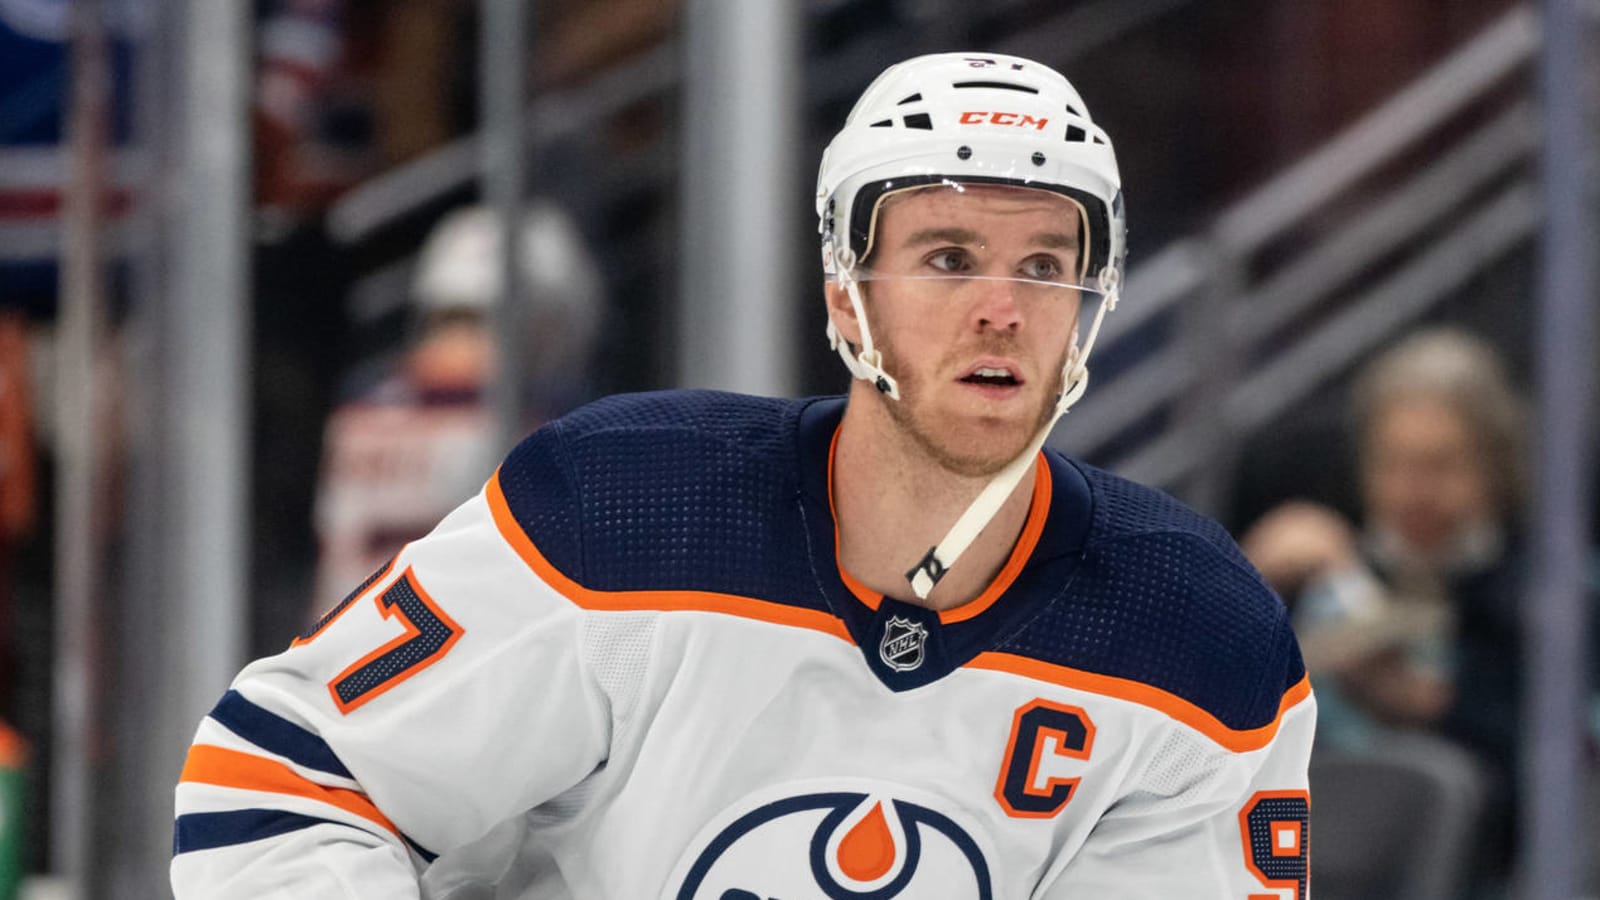 Oilers star Connor McDavid tests positive for COVID-19